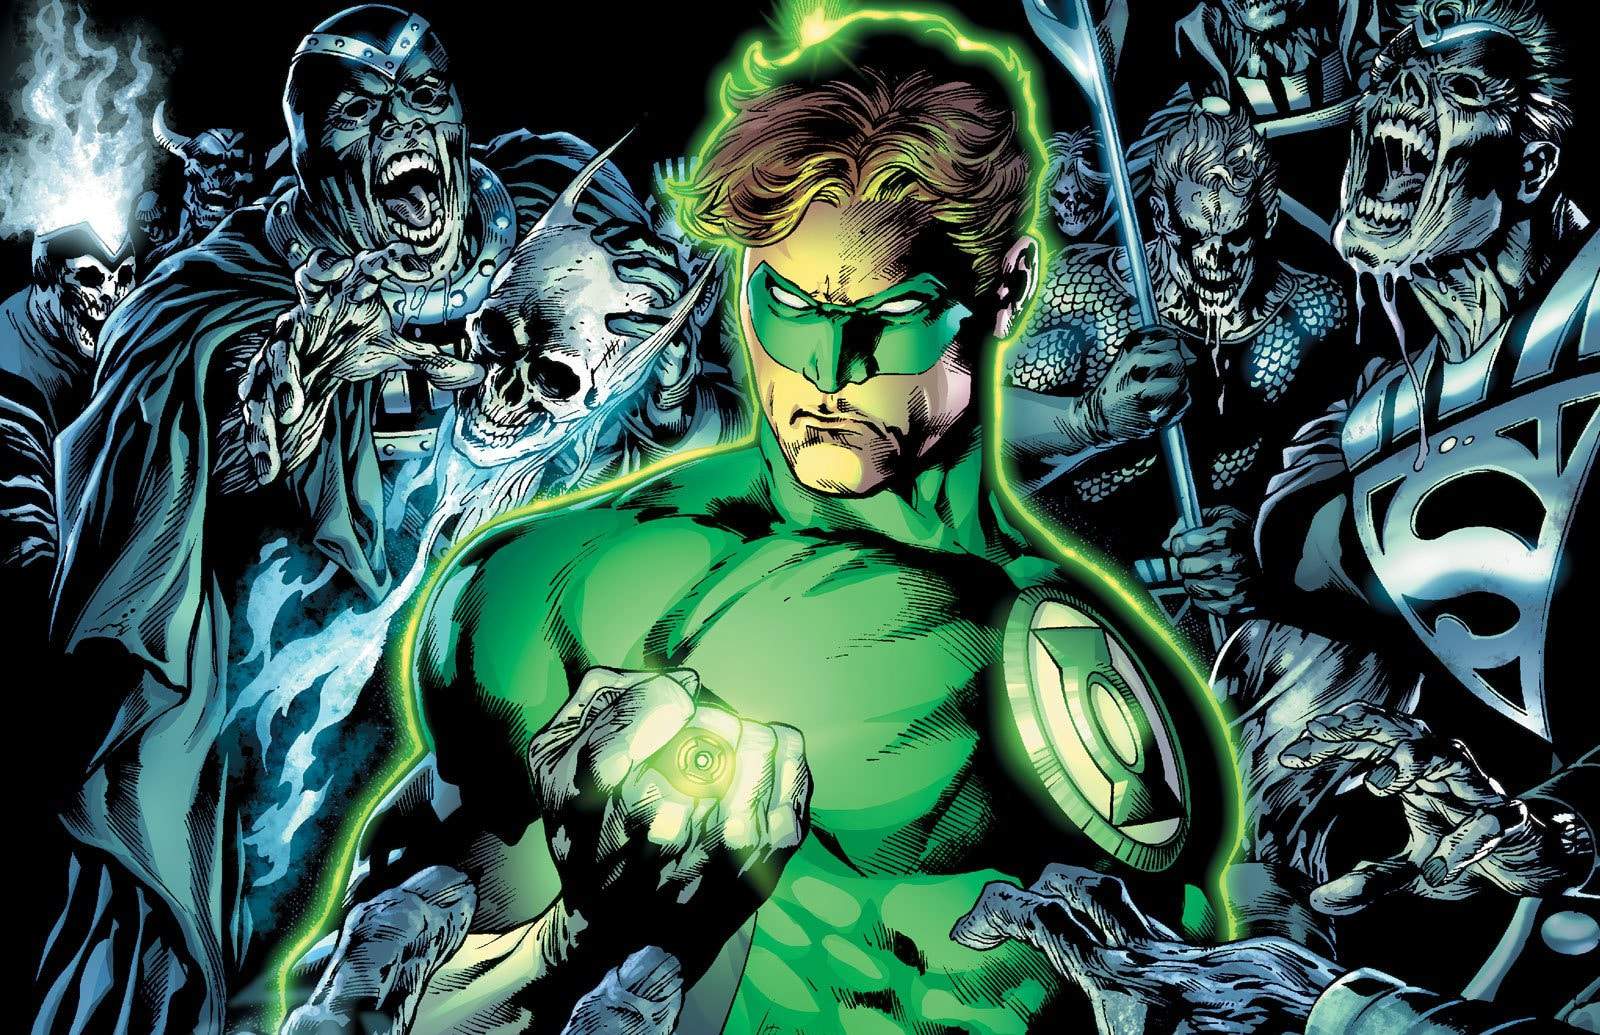 Geoff Johns Steps Down From Atop the DCEU, Is Writing 'Green Lantern Corps'